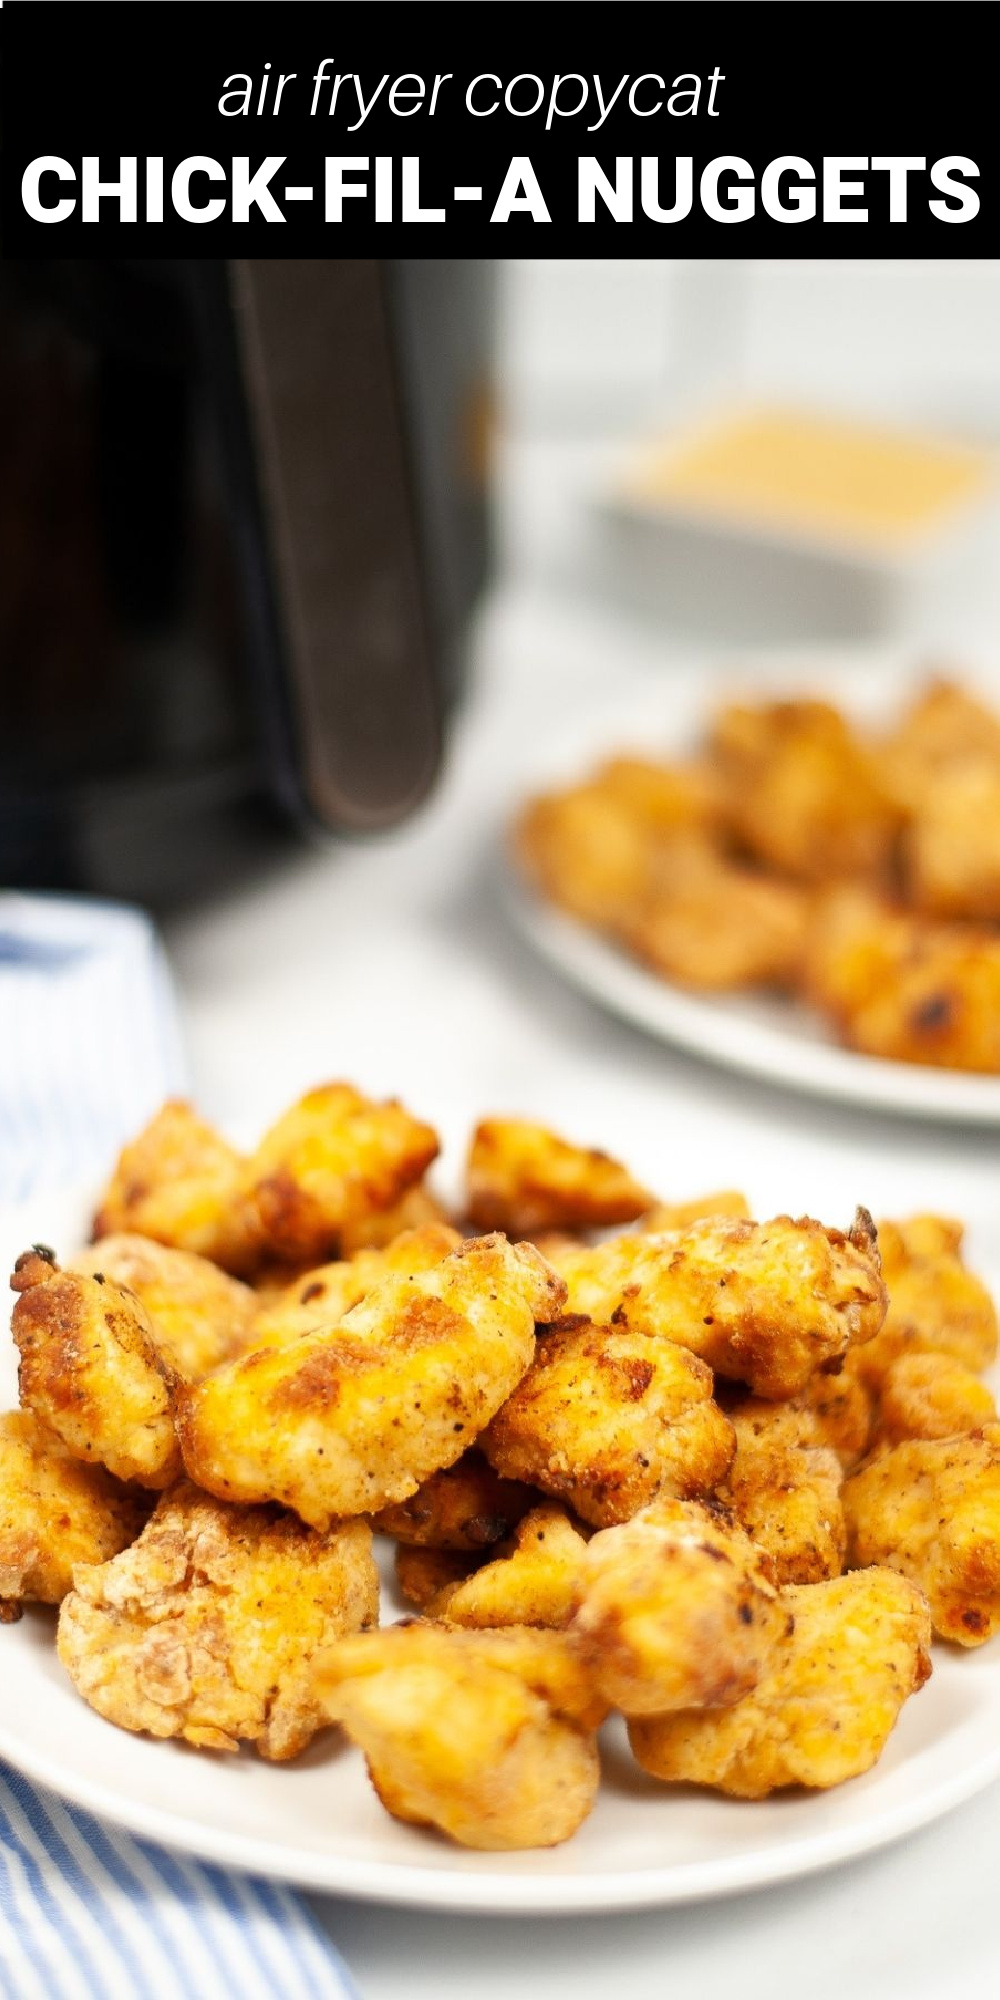 This air fryer version of Copycat Chick-fil-A Chicken Nuggets will be a huge hit with the whole family, kids and adults alike! Made with real chicken breasts, a blend of spices, and a secret ingredient, I think you'll agree these nuggets even taste better than the real thing! 